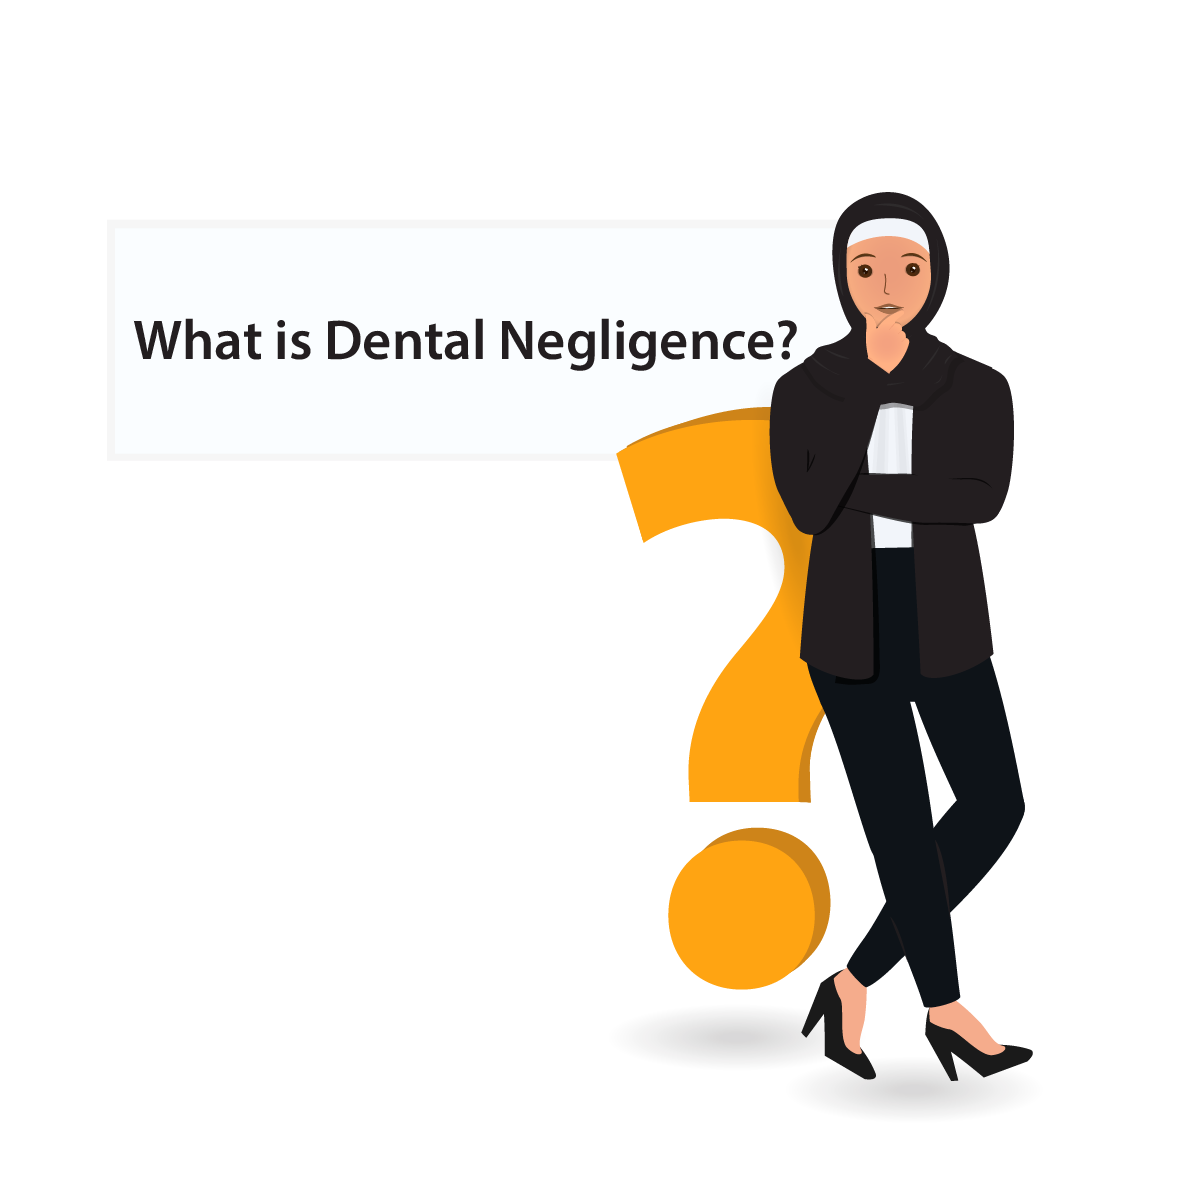 What is Dental Negligence